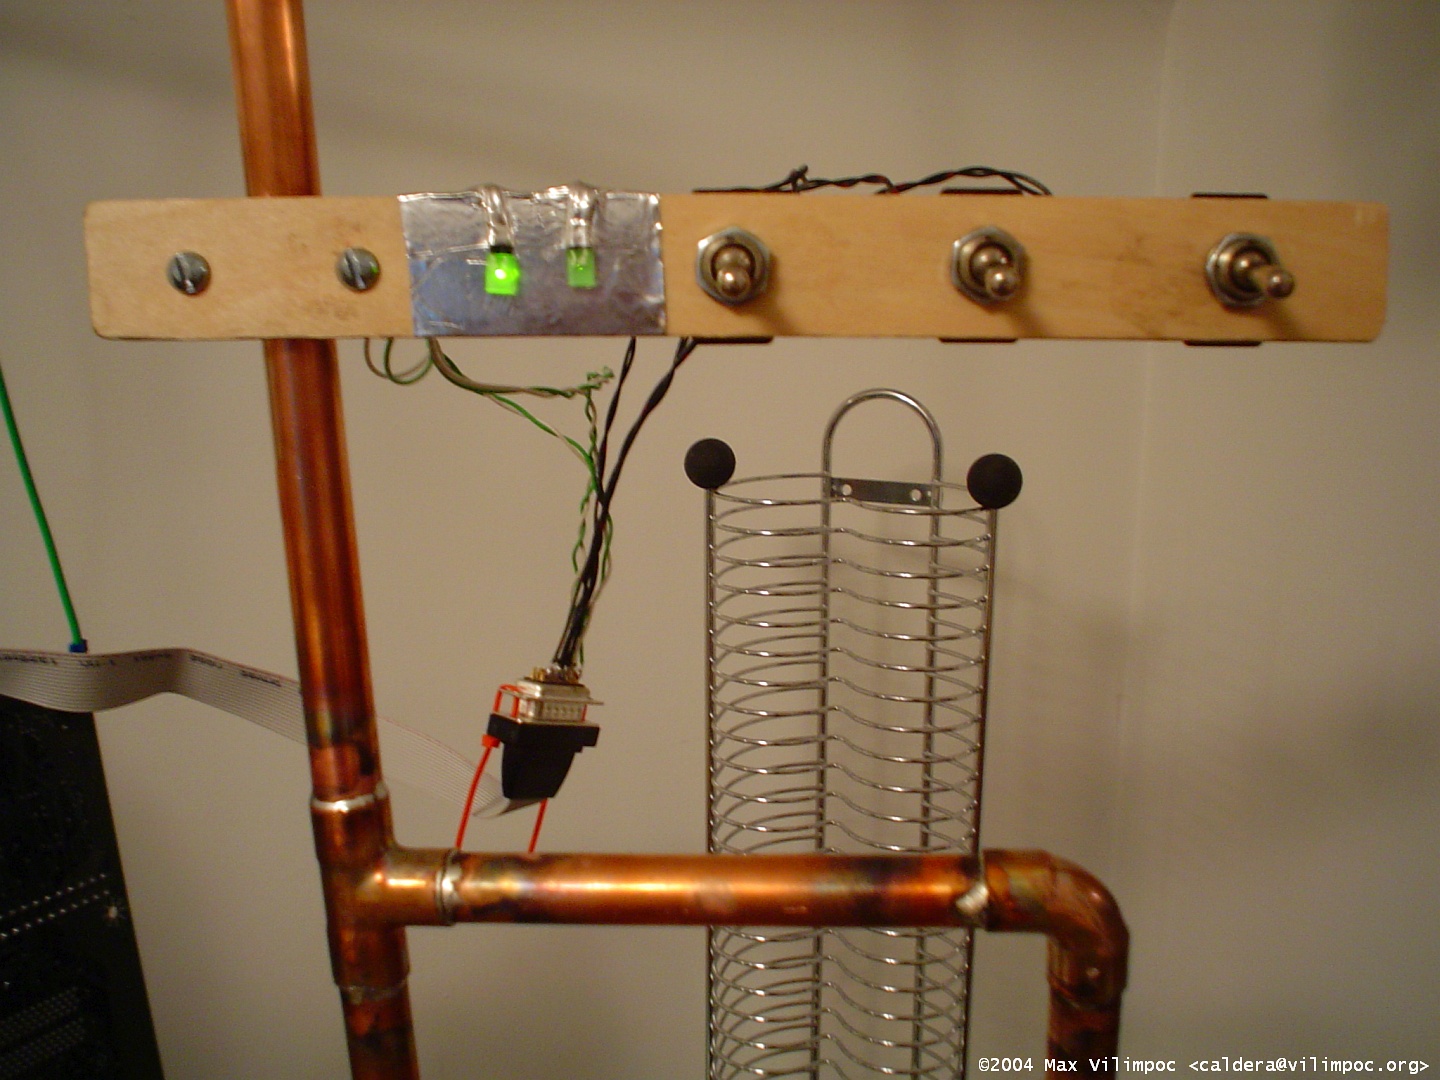 A view of the custom power, reset, and turbo single pole single throw switches mounted horizontally to a piece of wood, which is attached to the vertical stem of the computer